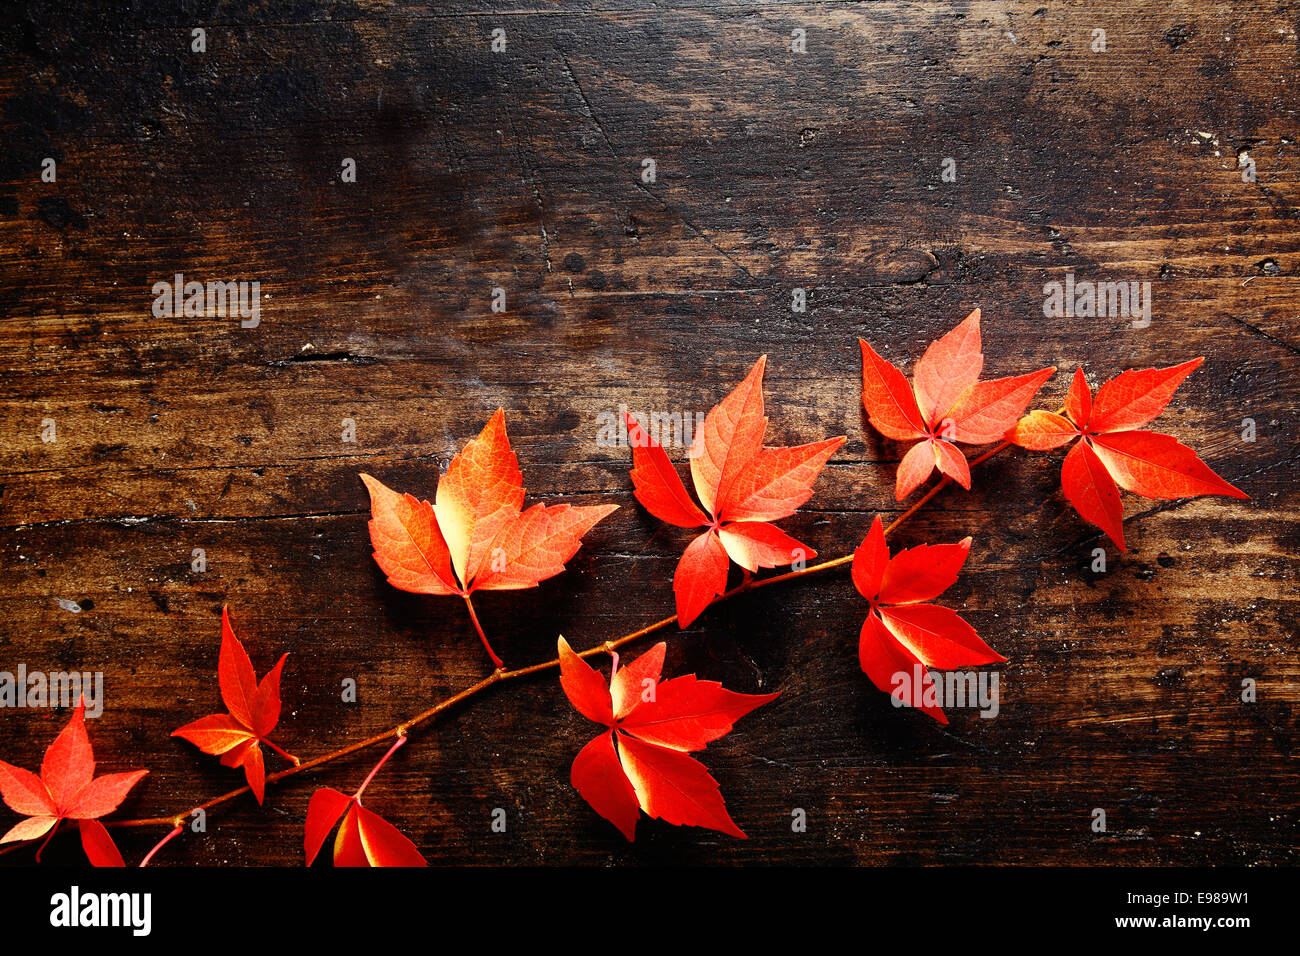 Trailing vine tendril covered in vibrant colourful red autumn virginia creeper leaves against a dark timber background with texture Stock Photo